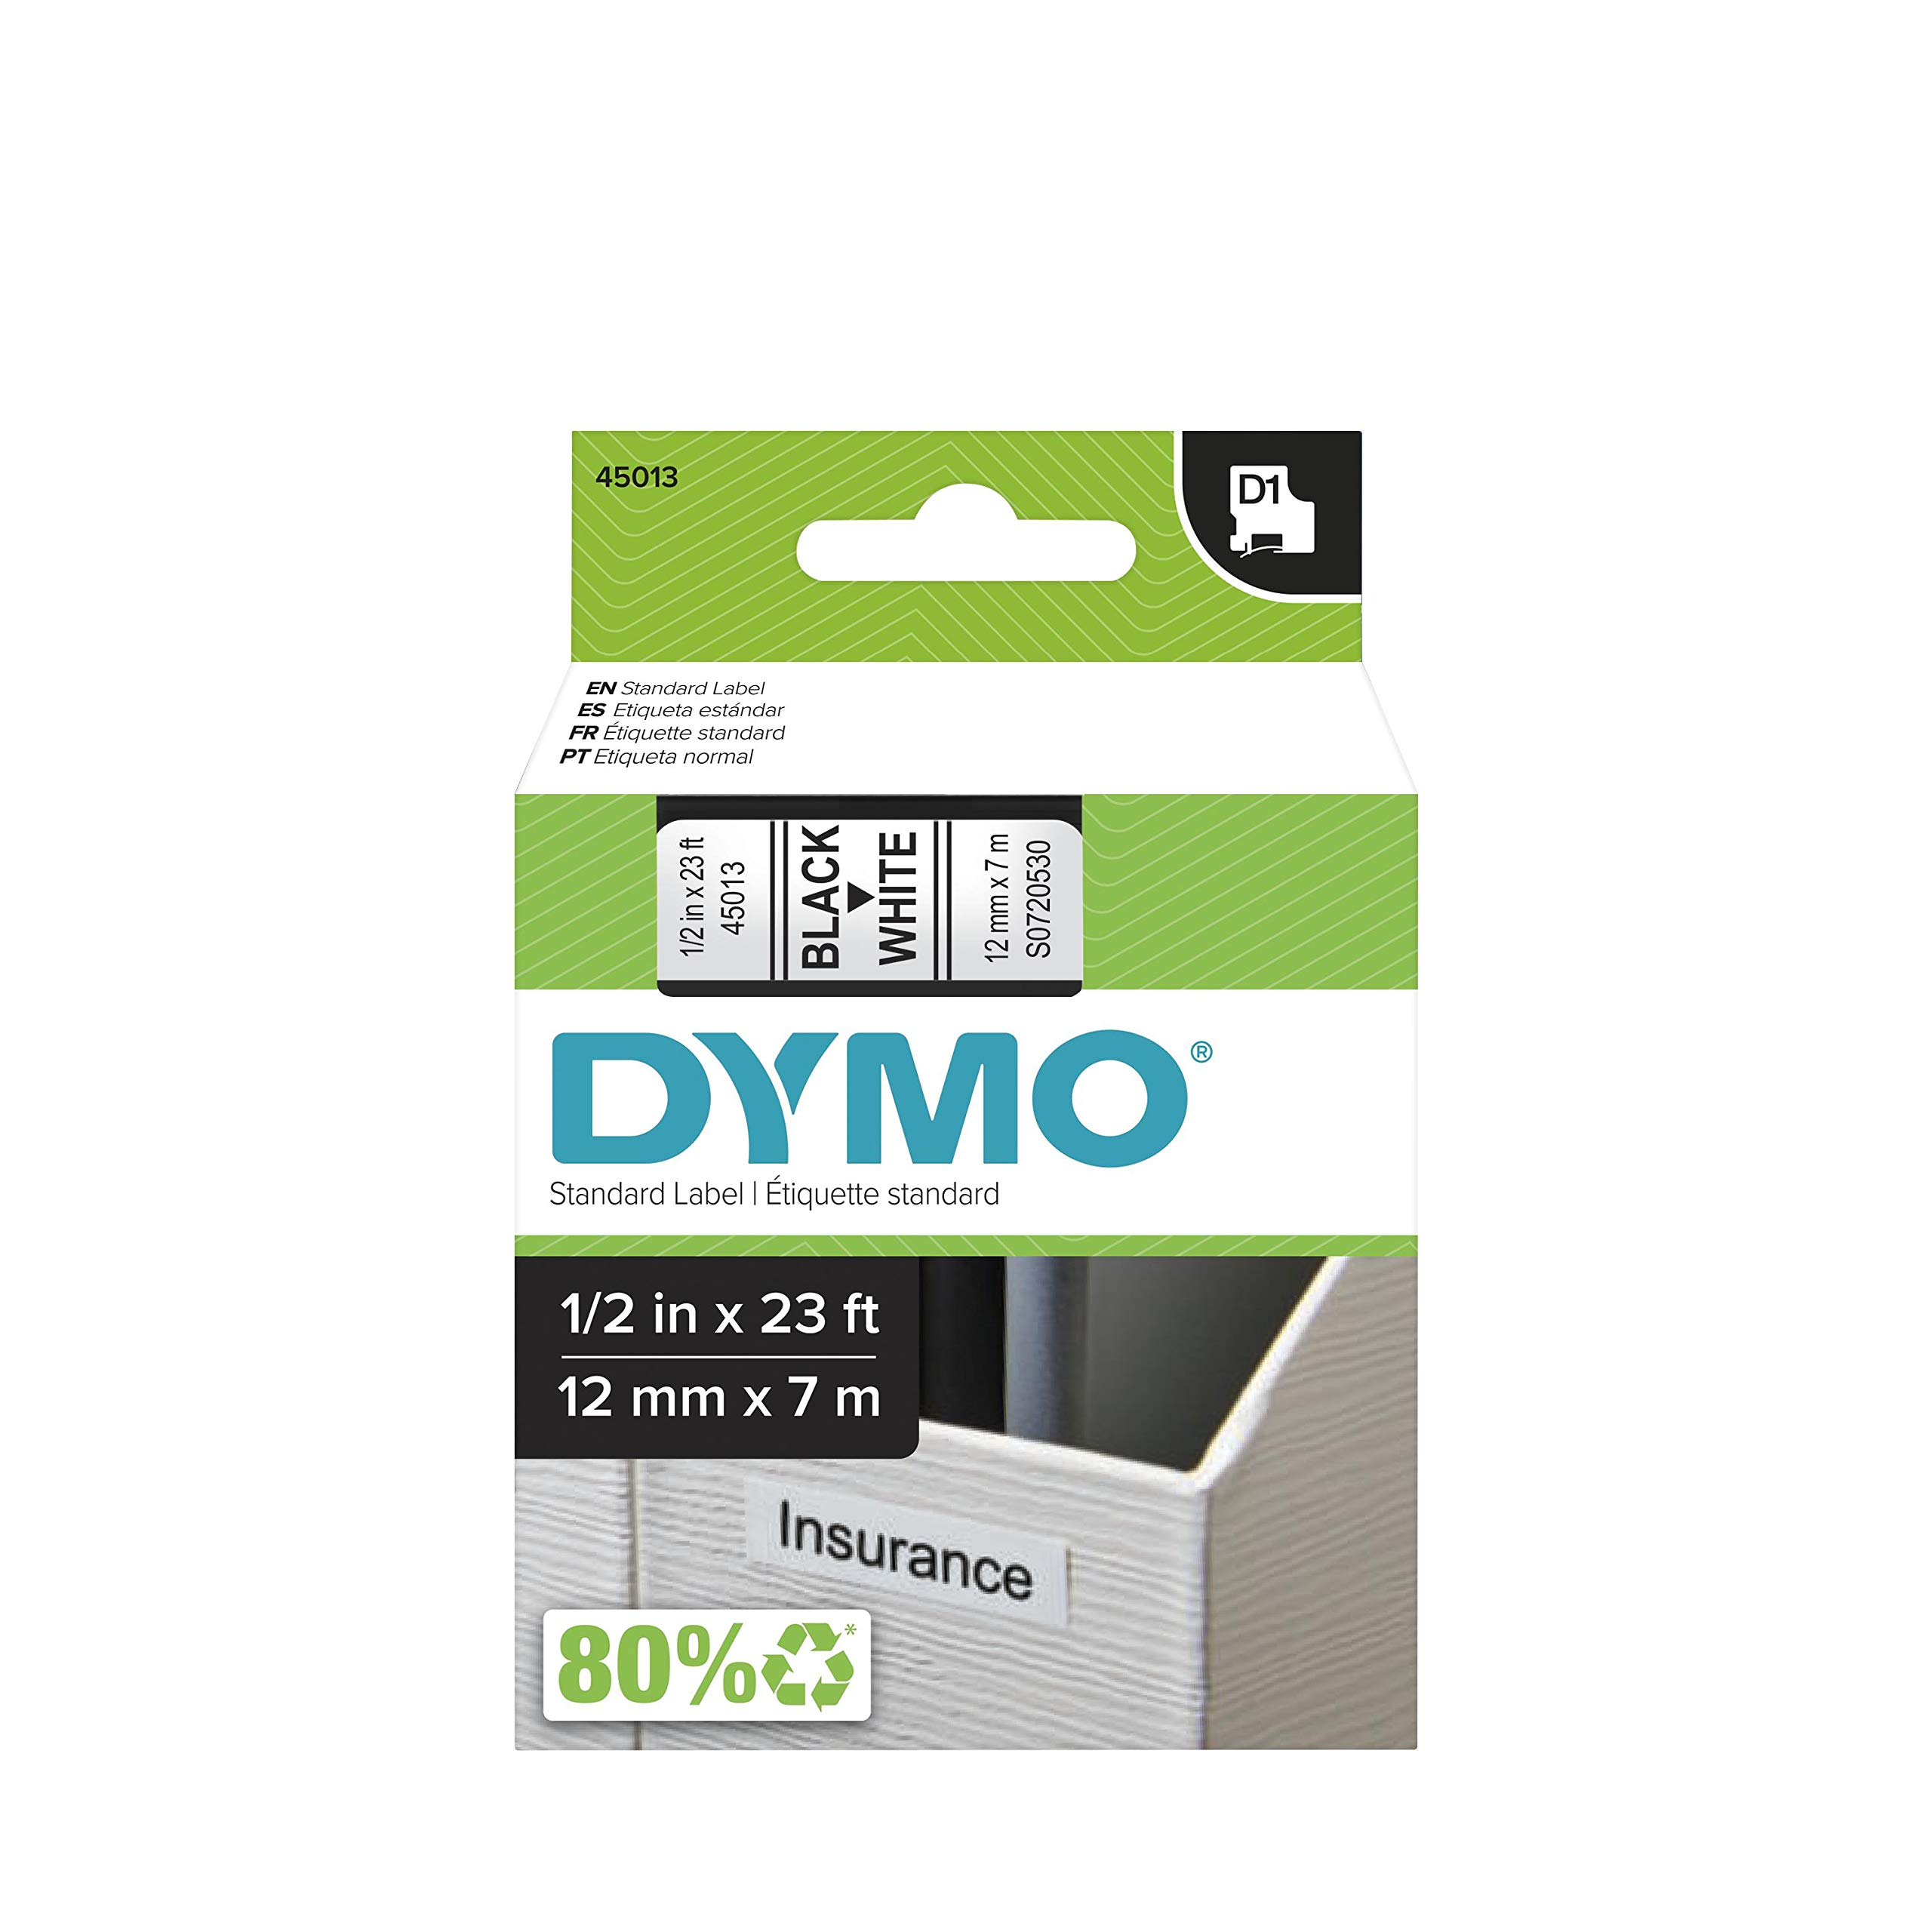 DYMO Standard D1 Labeling Tape for LabelManager Label Makers, Black Print on White Tape, 1/2'' W x 23' L, 1 catridge (45013)